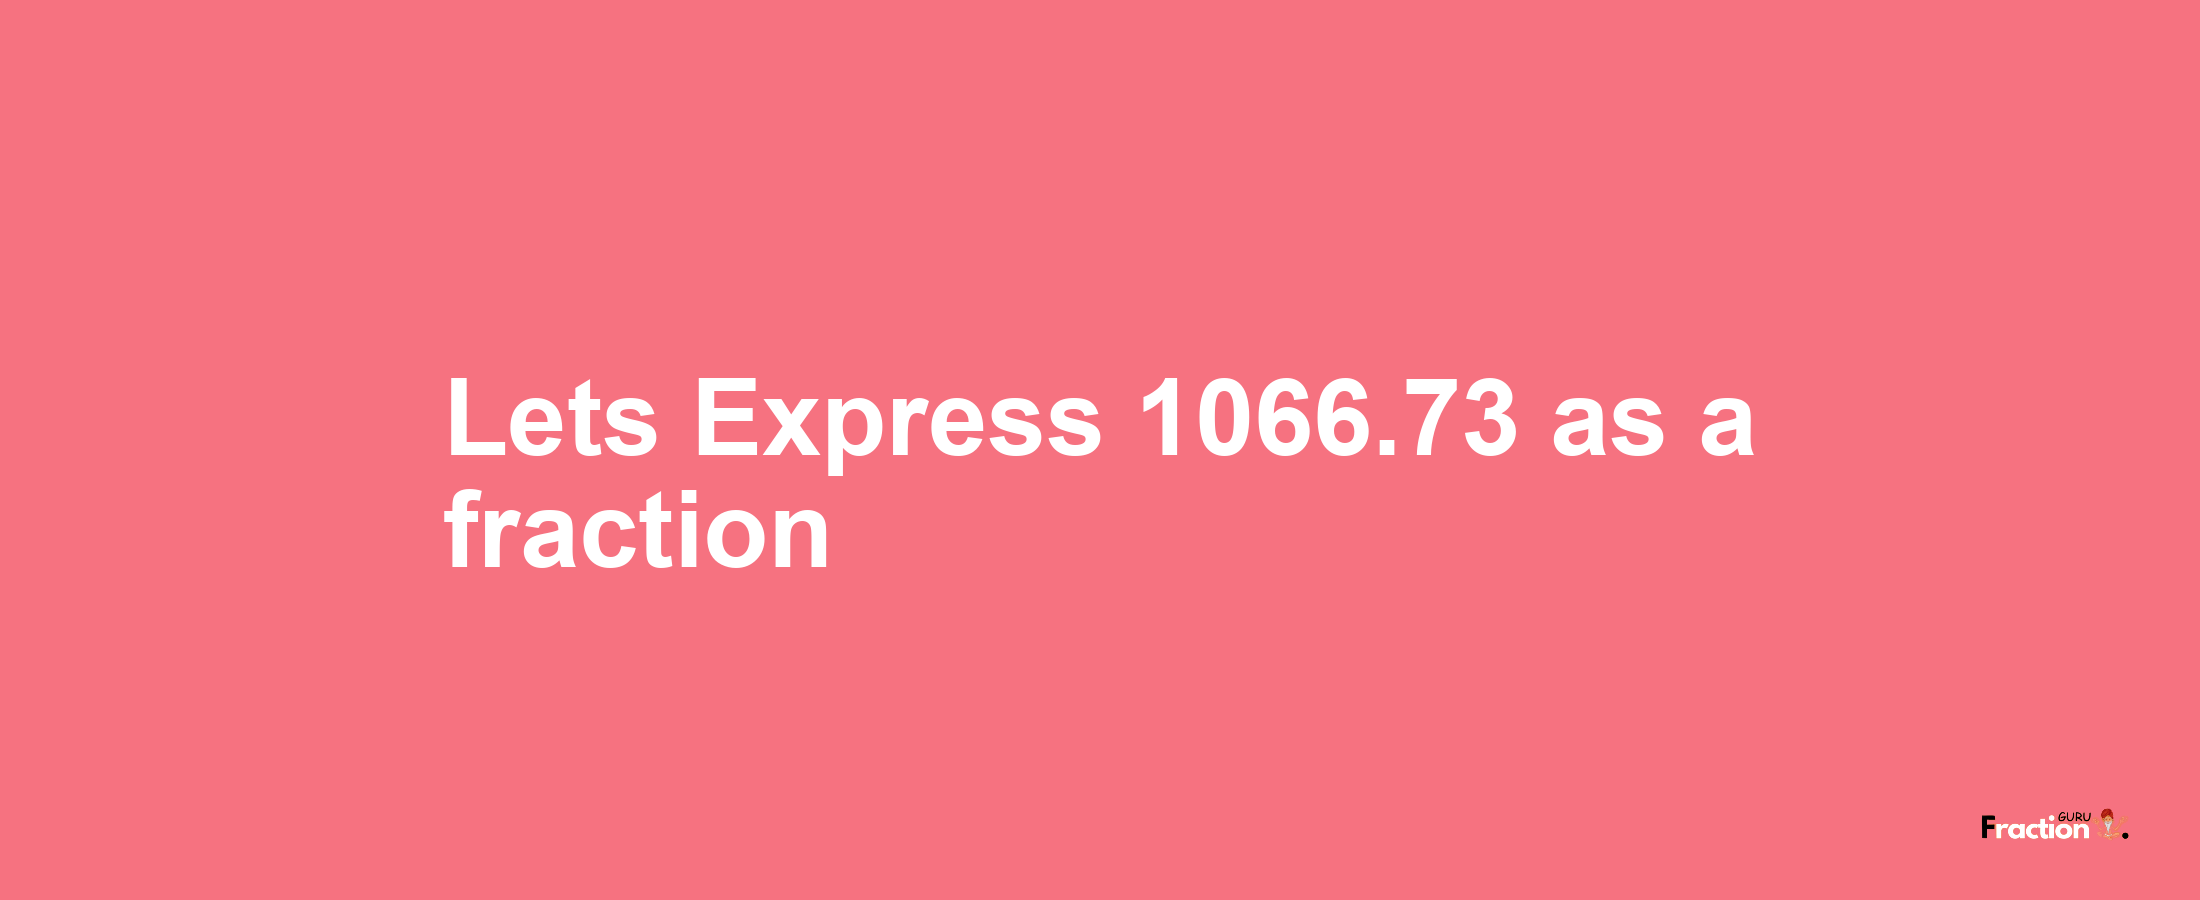 Lets Express 1066.73 as afraction